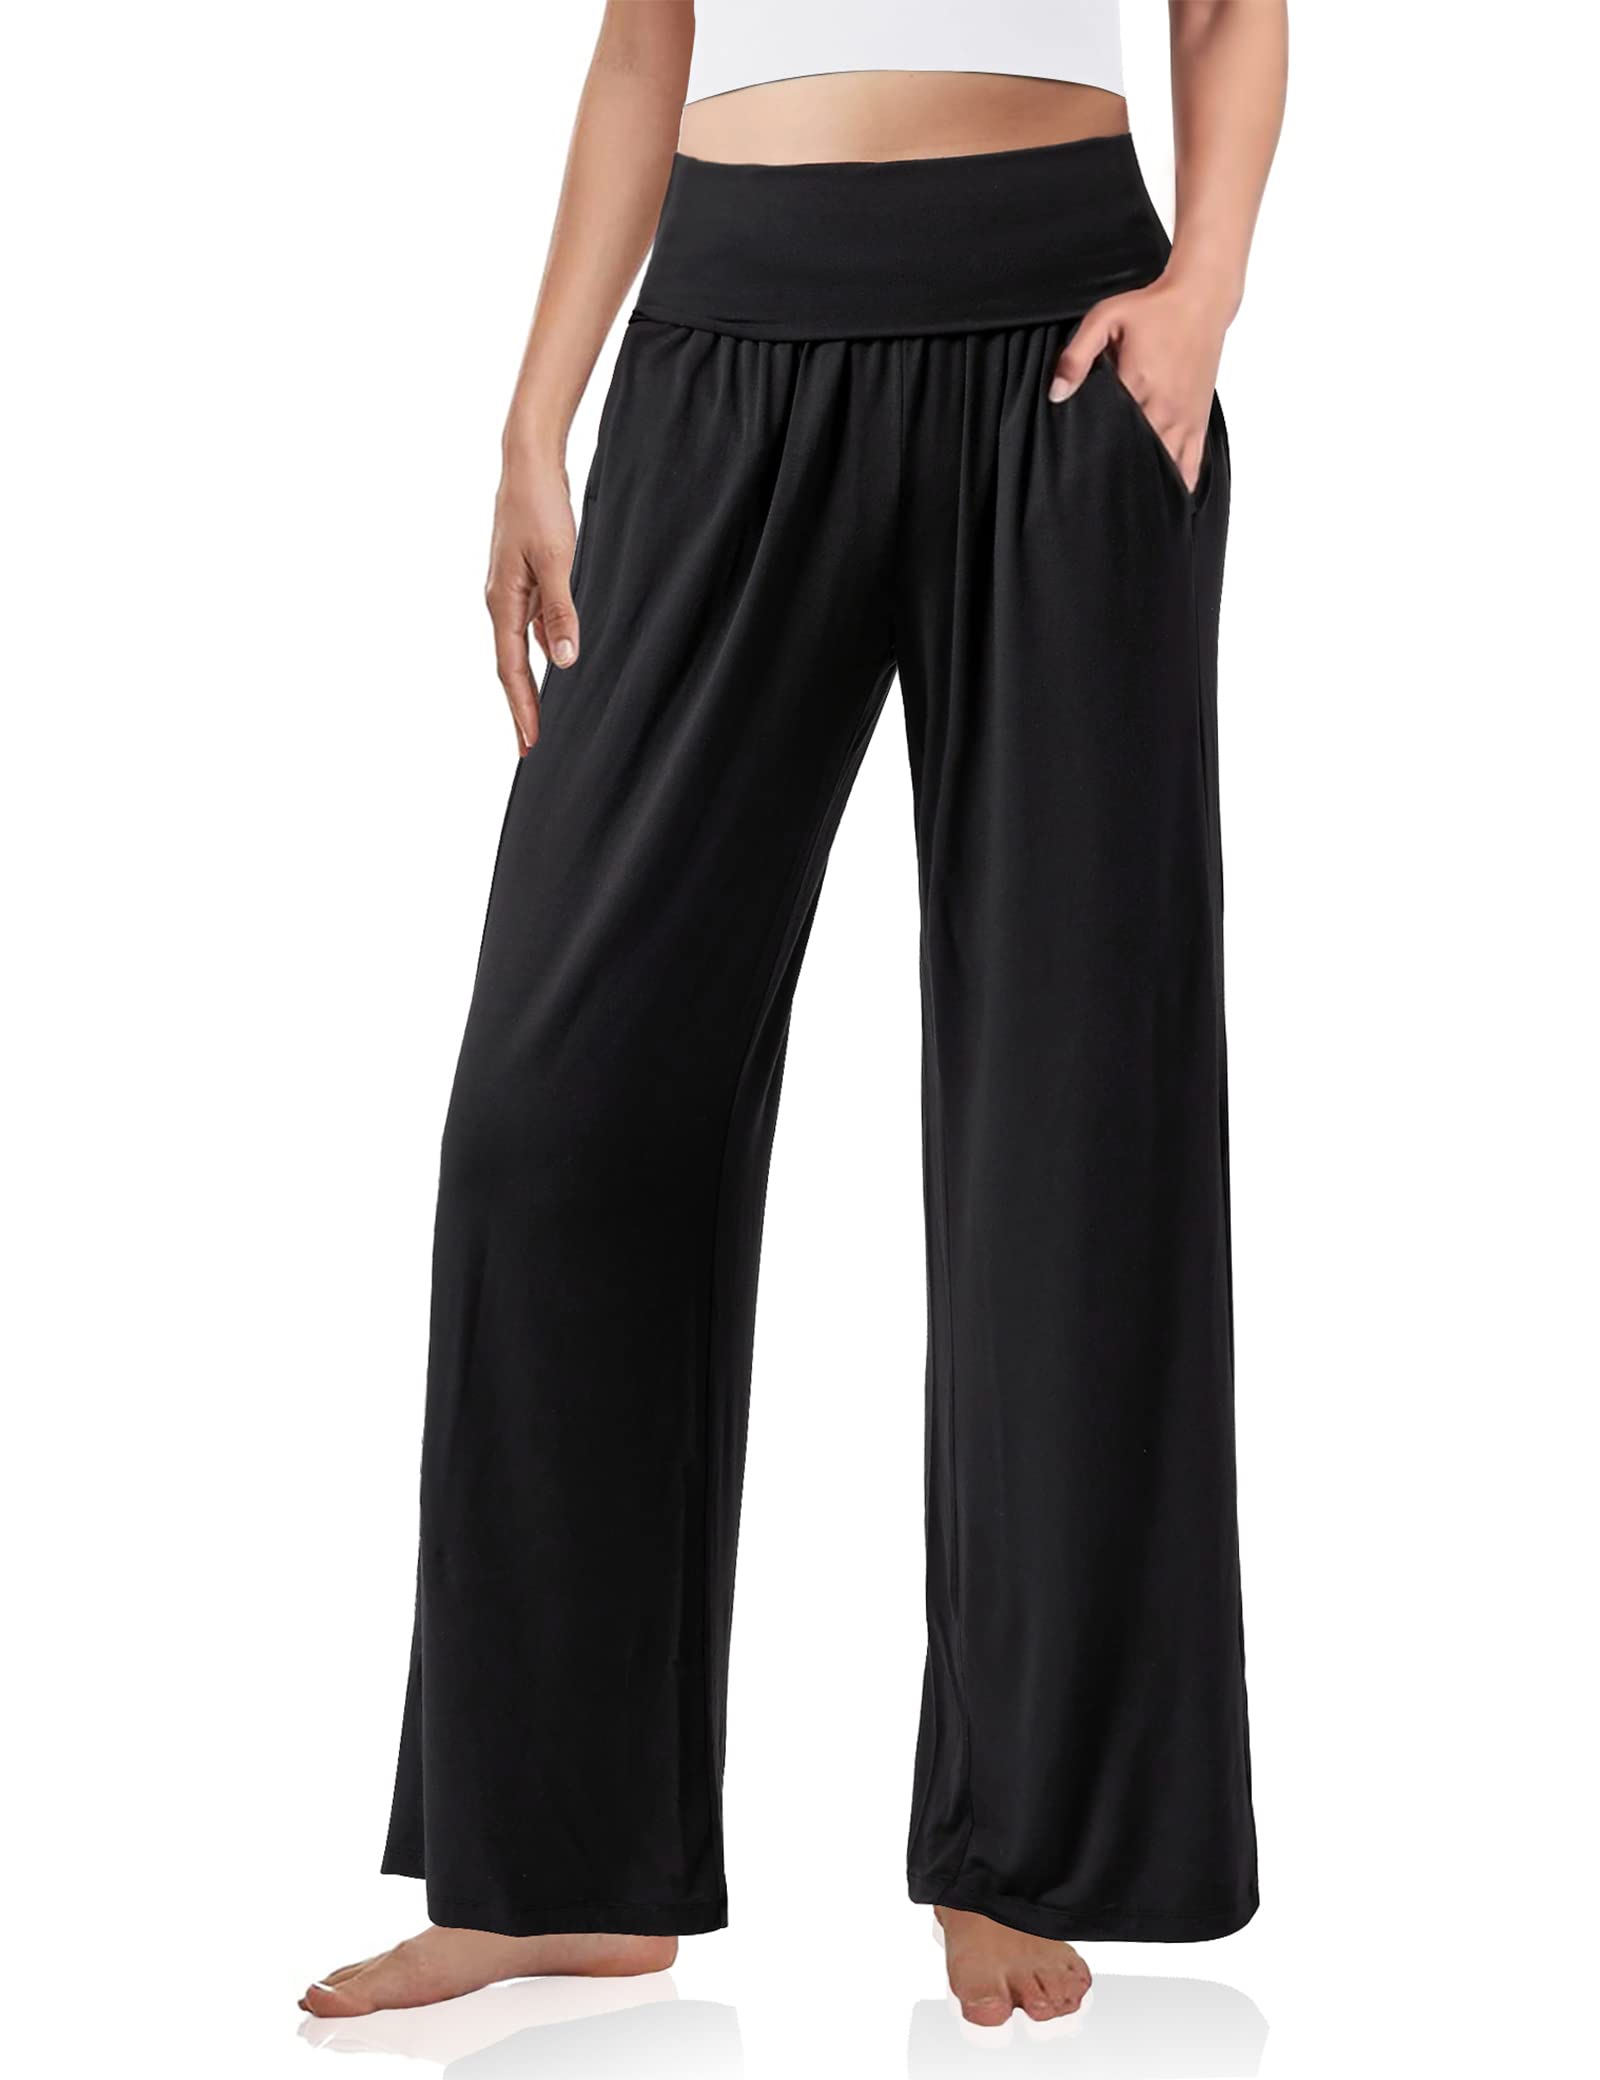 Baggy Sweatpants For Women With Pockets-Lounge Womens Pajams Pants